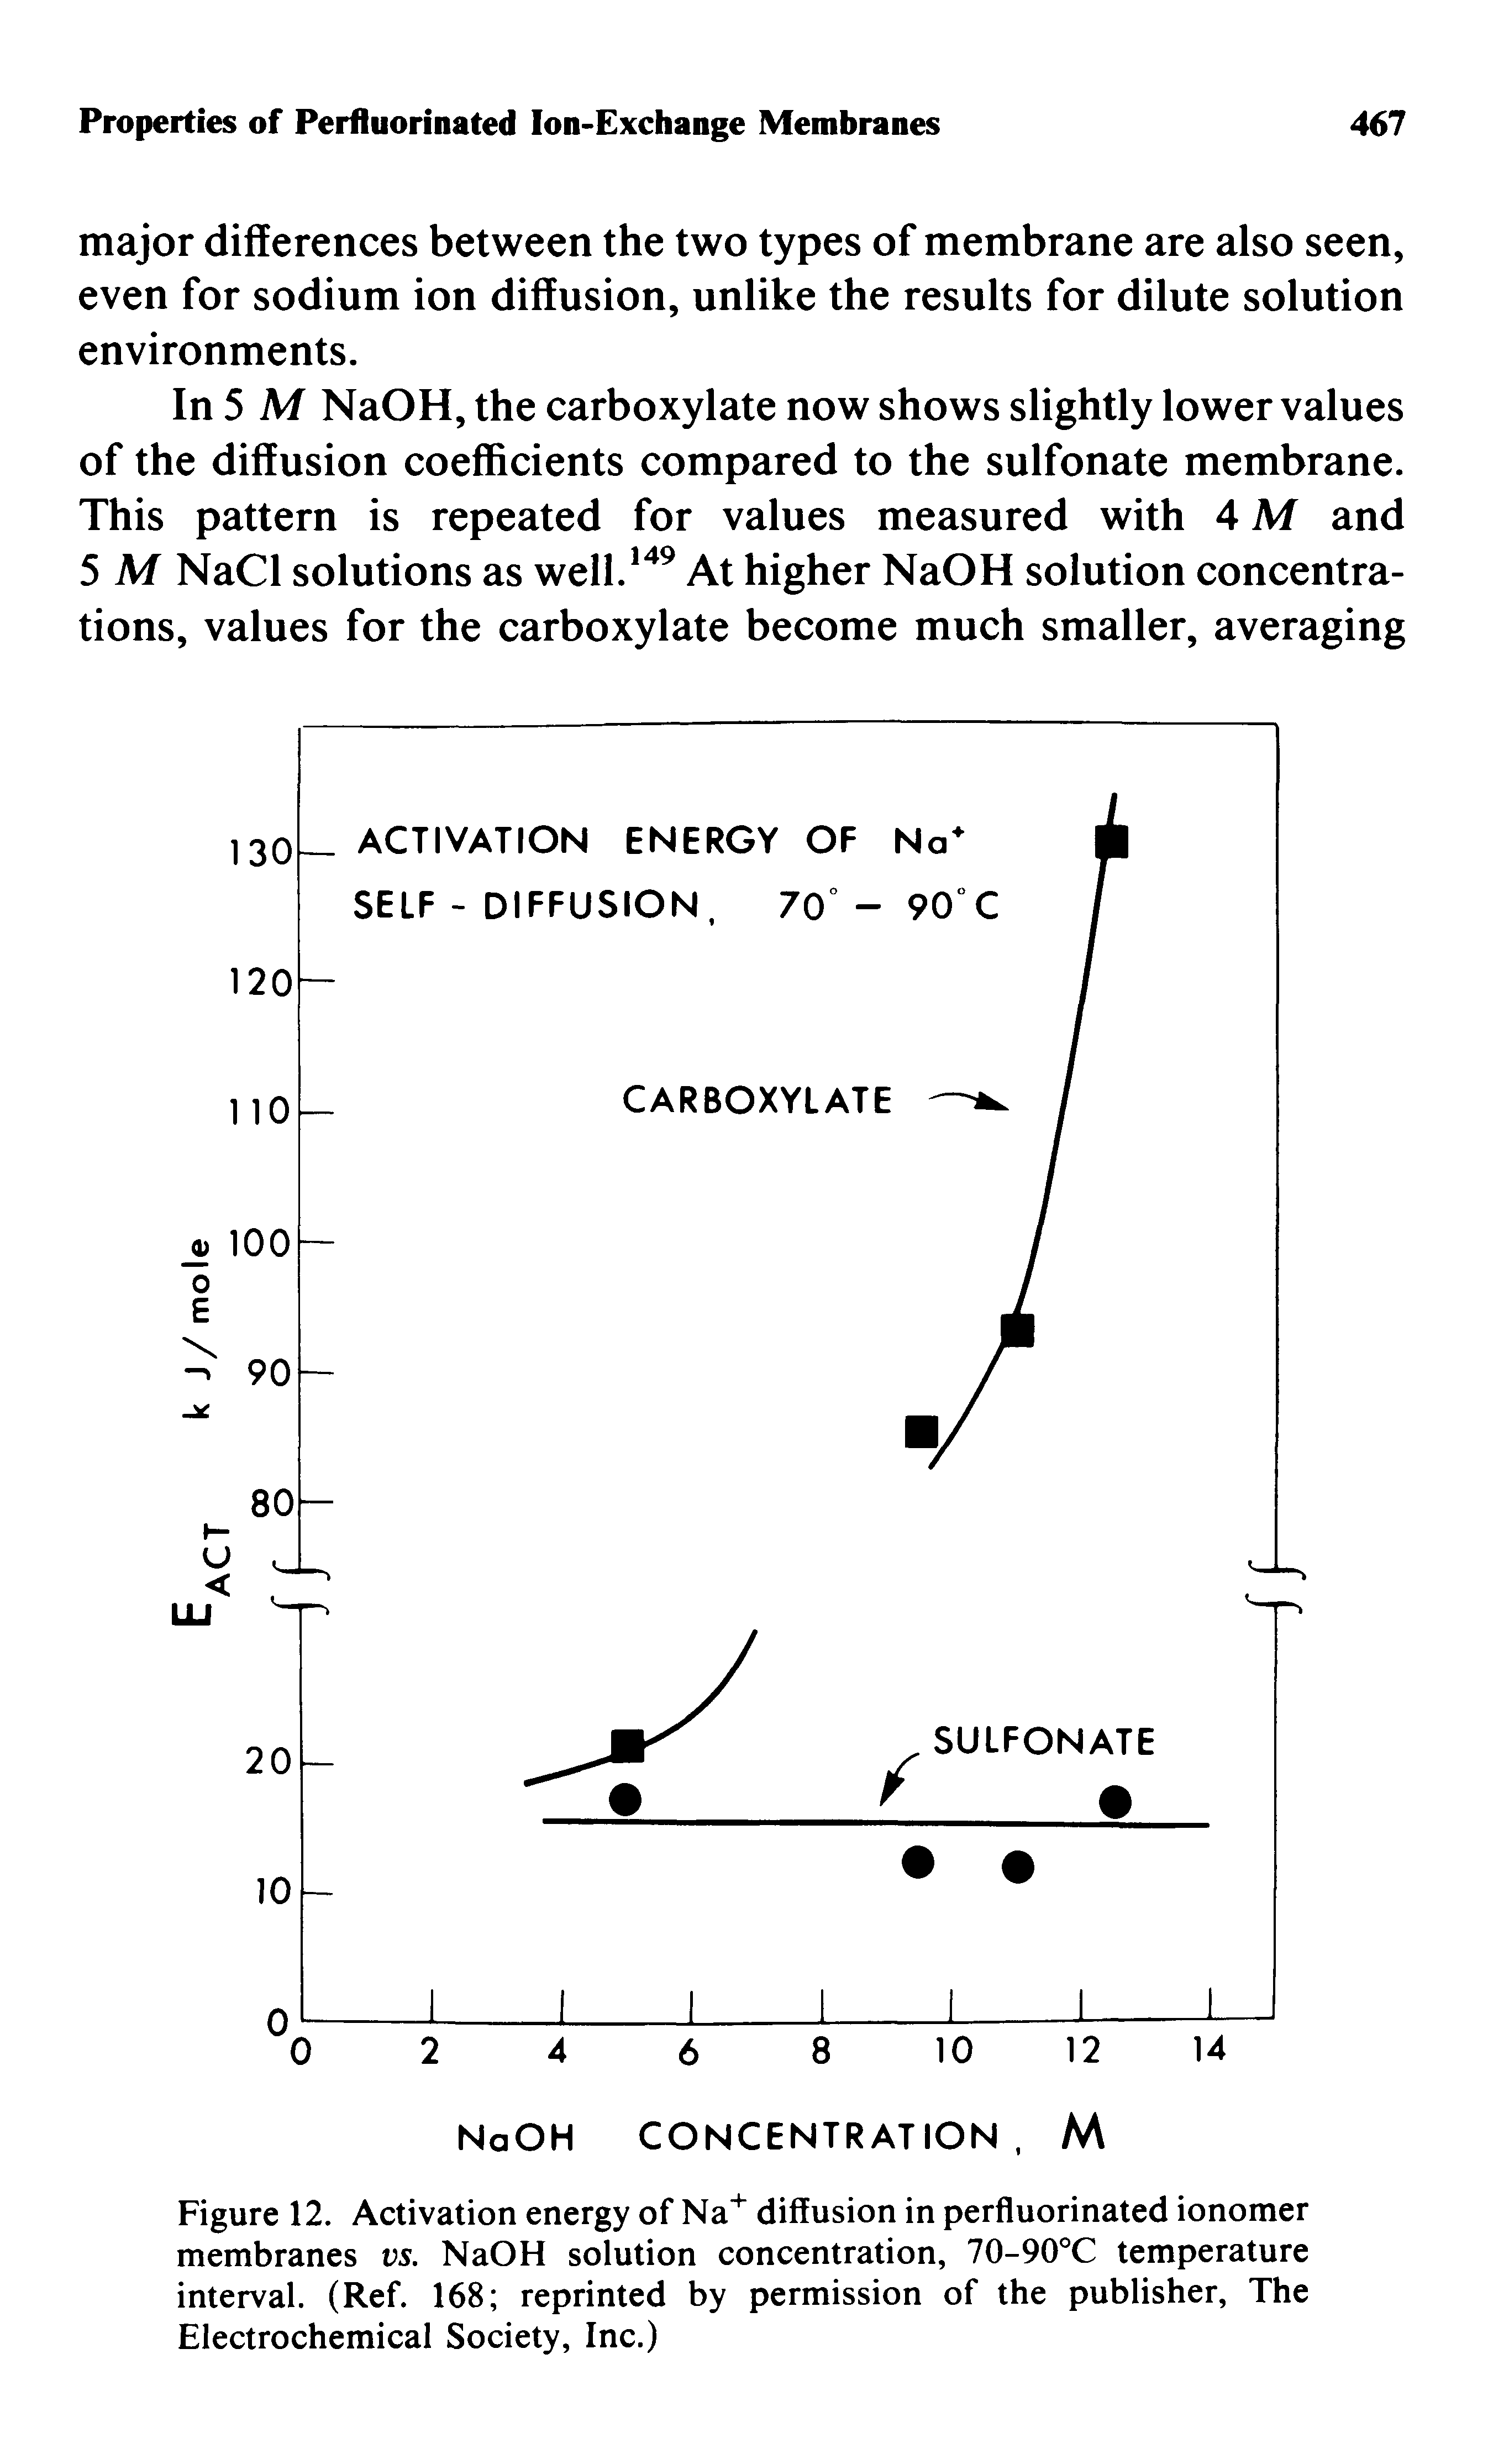 Figure 12. Activation energy of Na diffusion in perfluorinated ionomer membranes vs. NaOH solution concentration, 70-90°C temperature interval. (Ref. 168 reprinted by permission of the publisher, The Electrochemical Society, Inc.)...